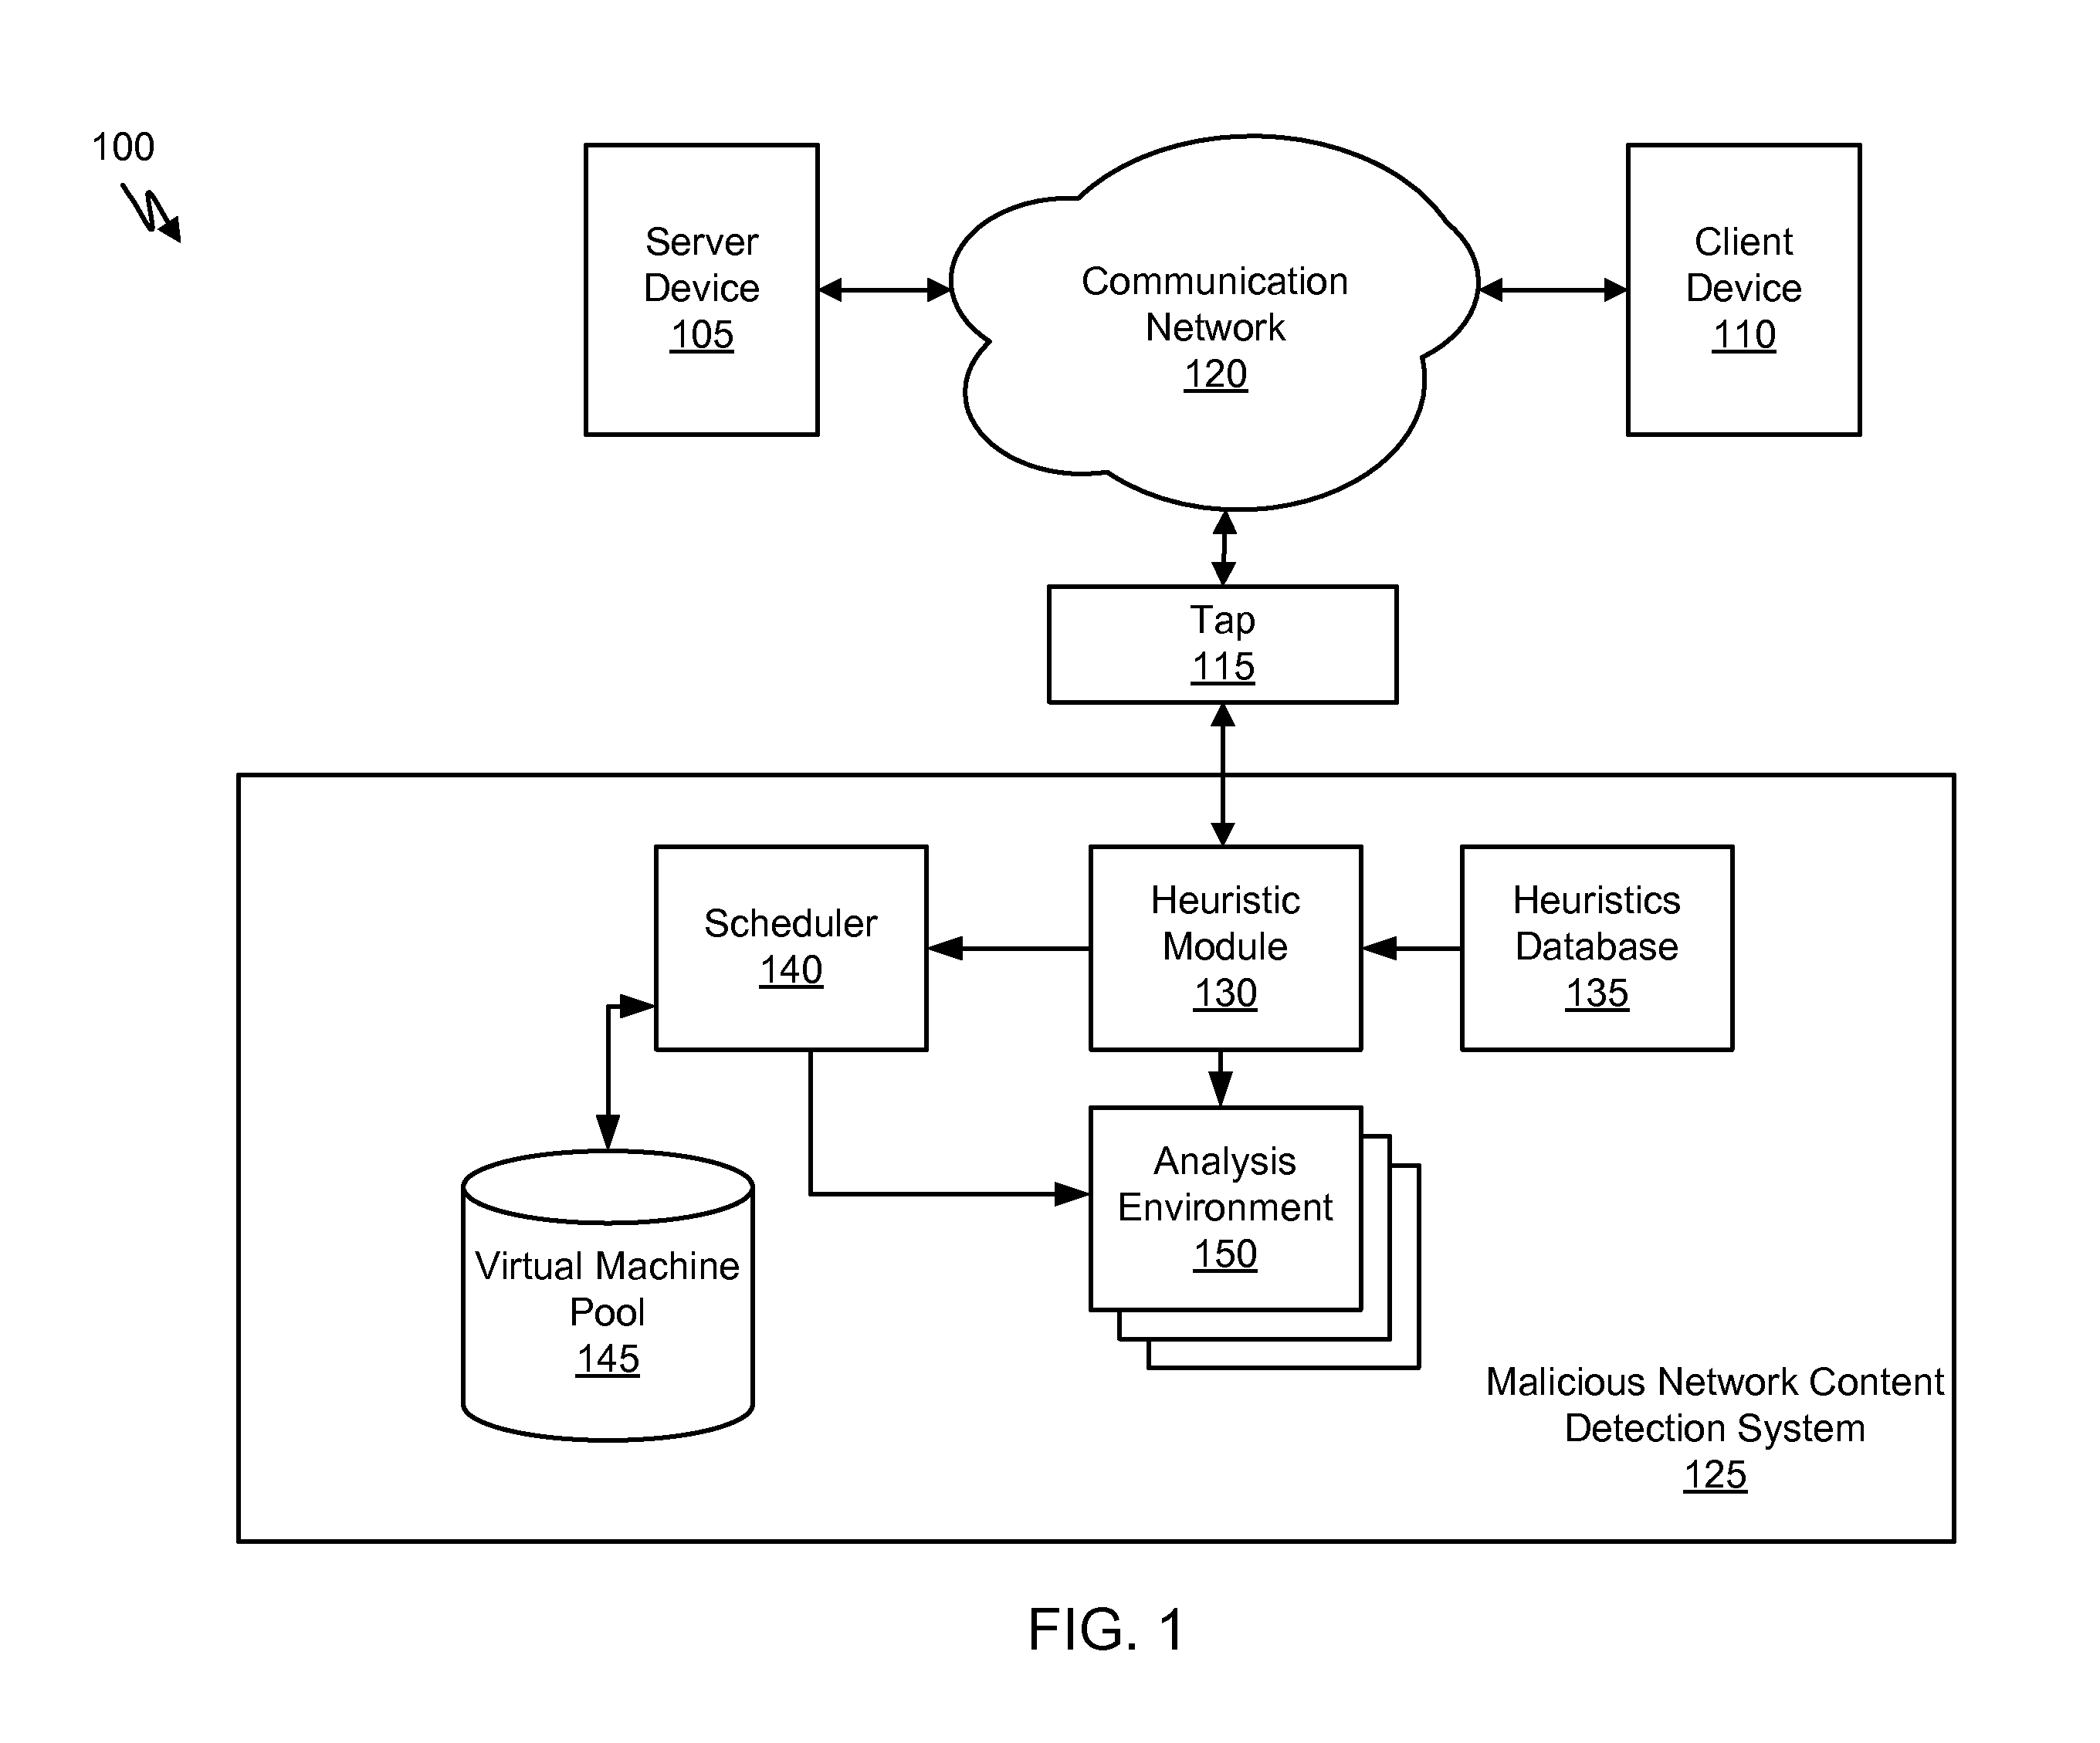 Systems and Methods for Detecting Malicious PDF Network Content